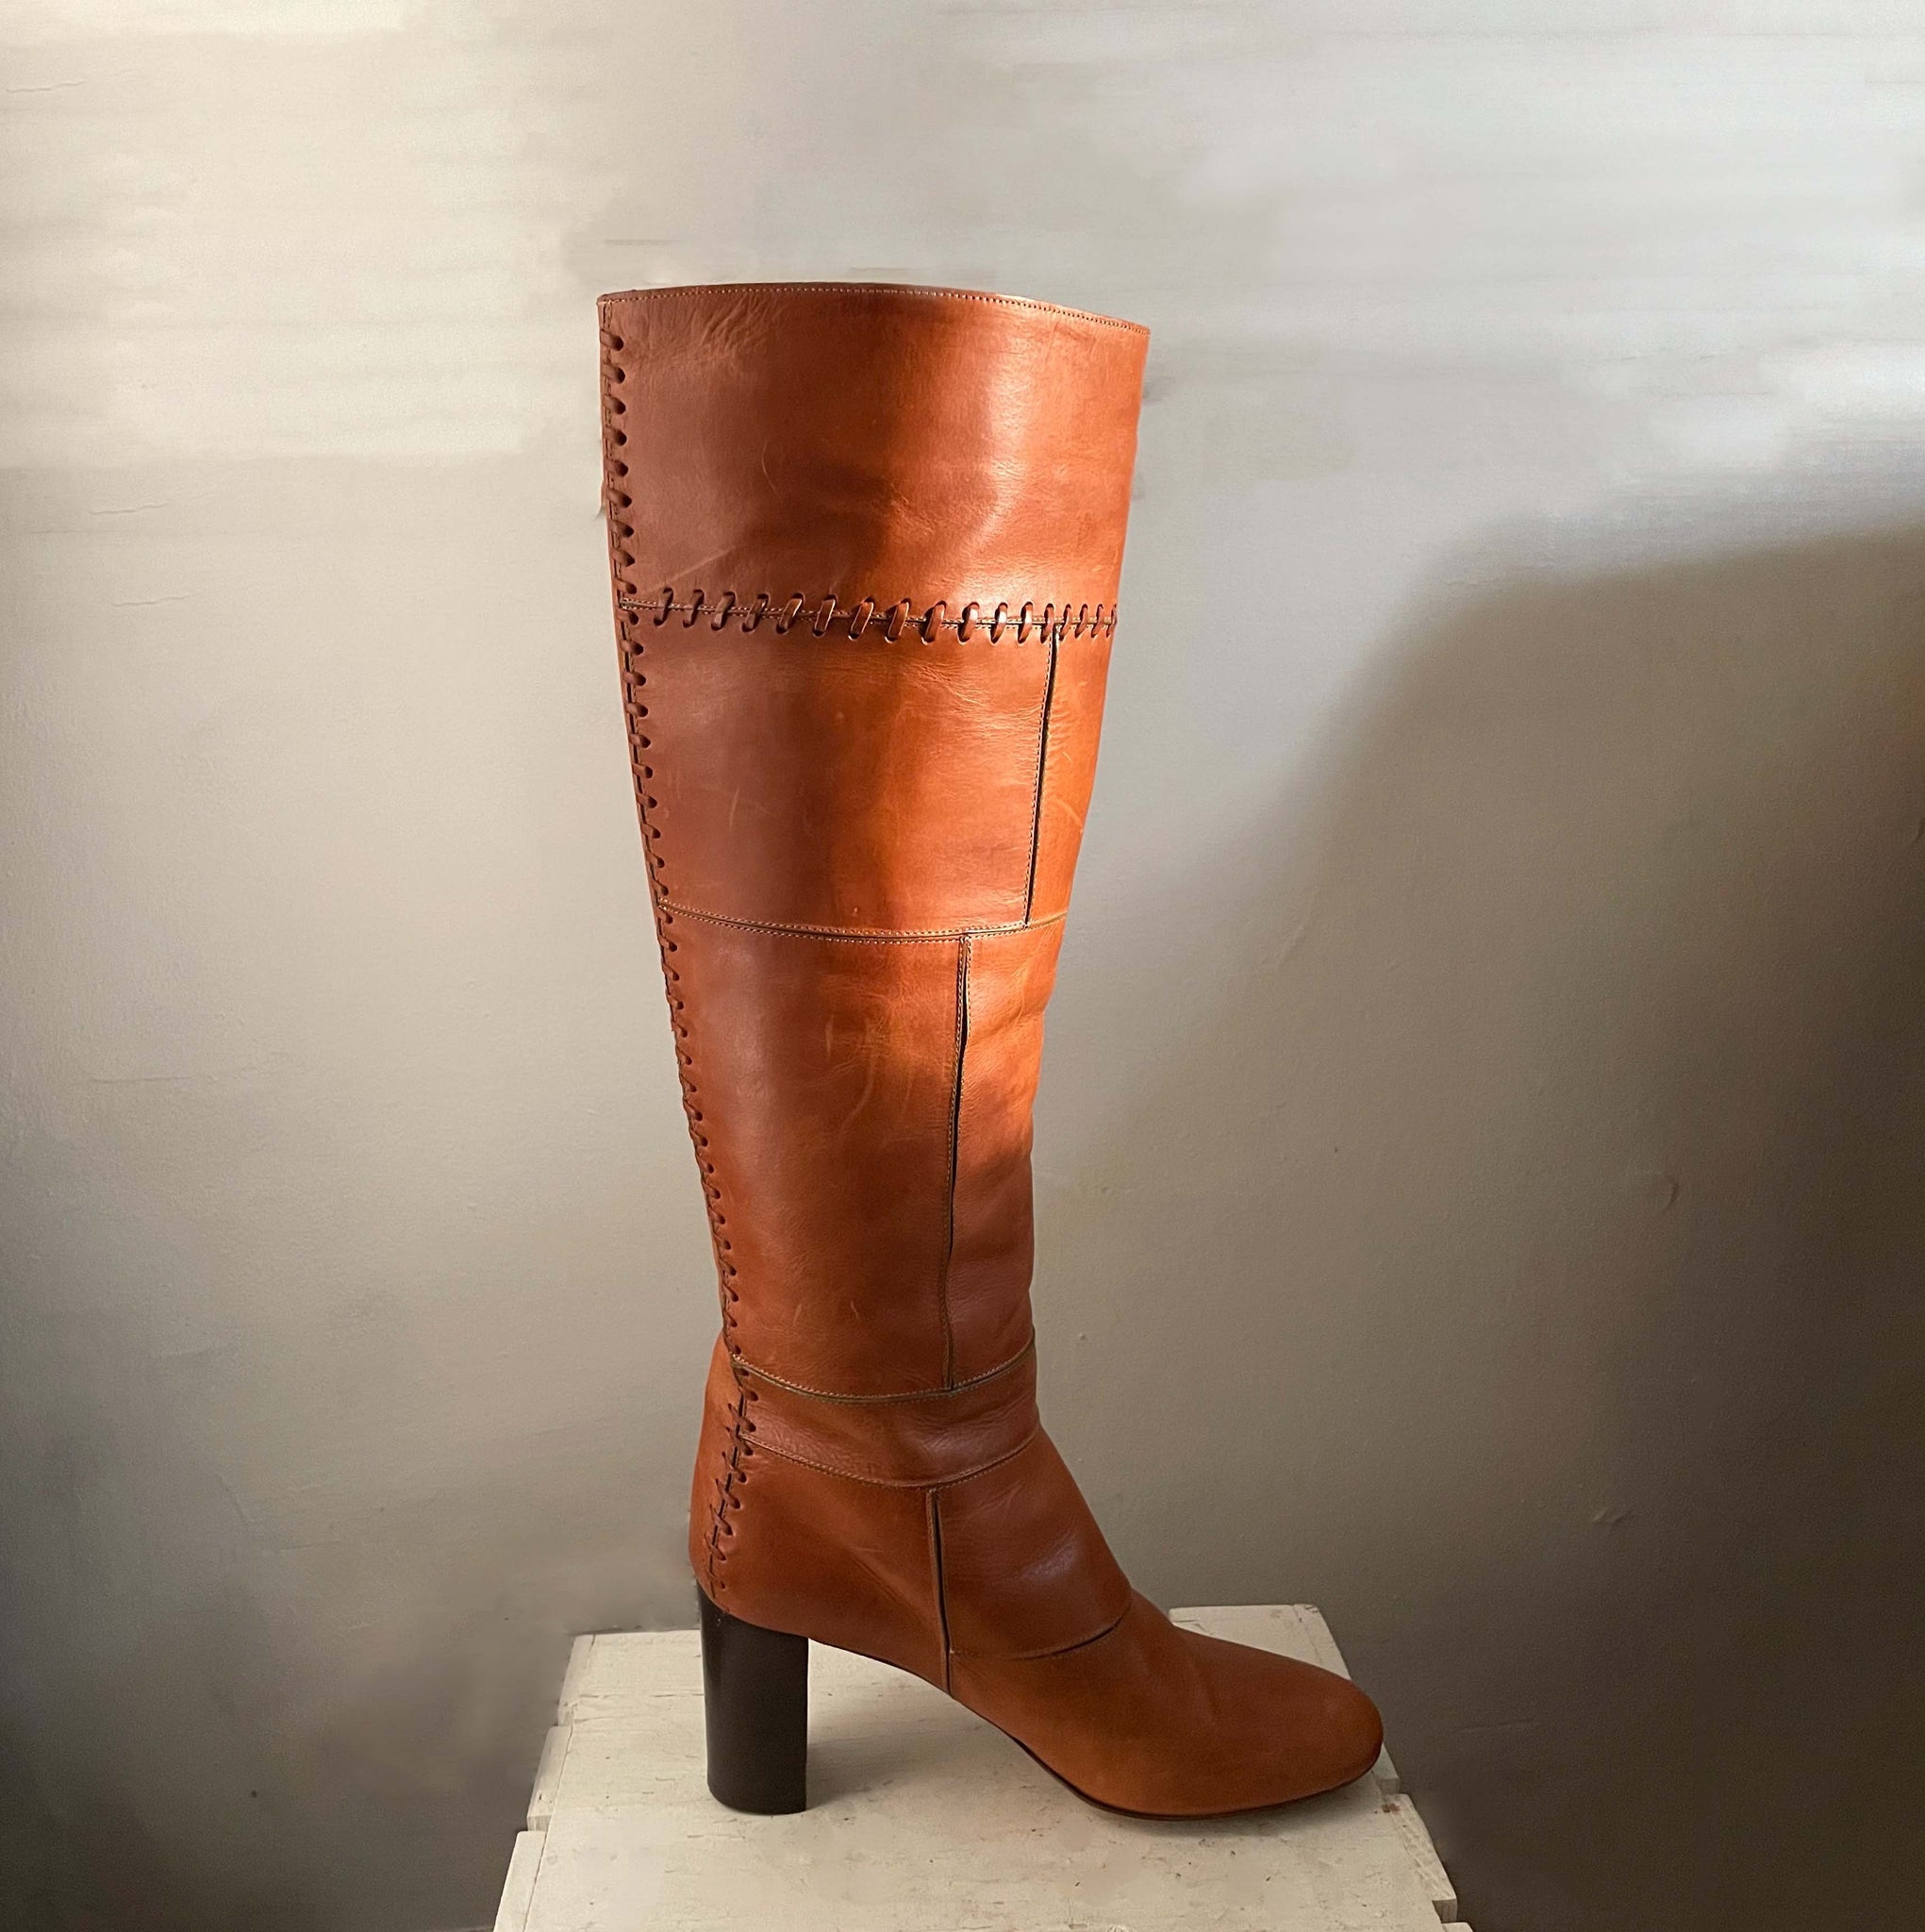 Authentic Chloé Leather Patchwork Heeled Boots (Sz. 40) (US9.5)